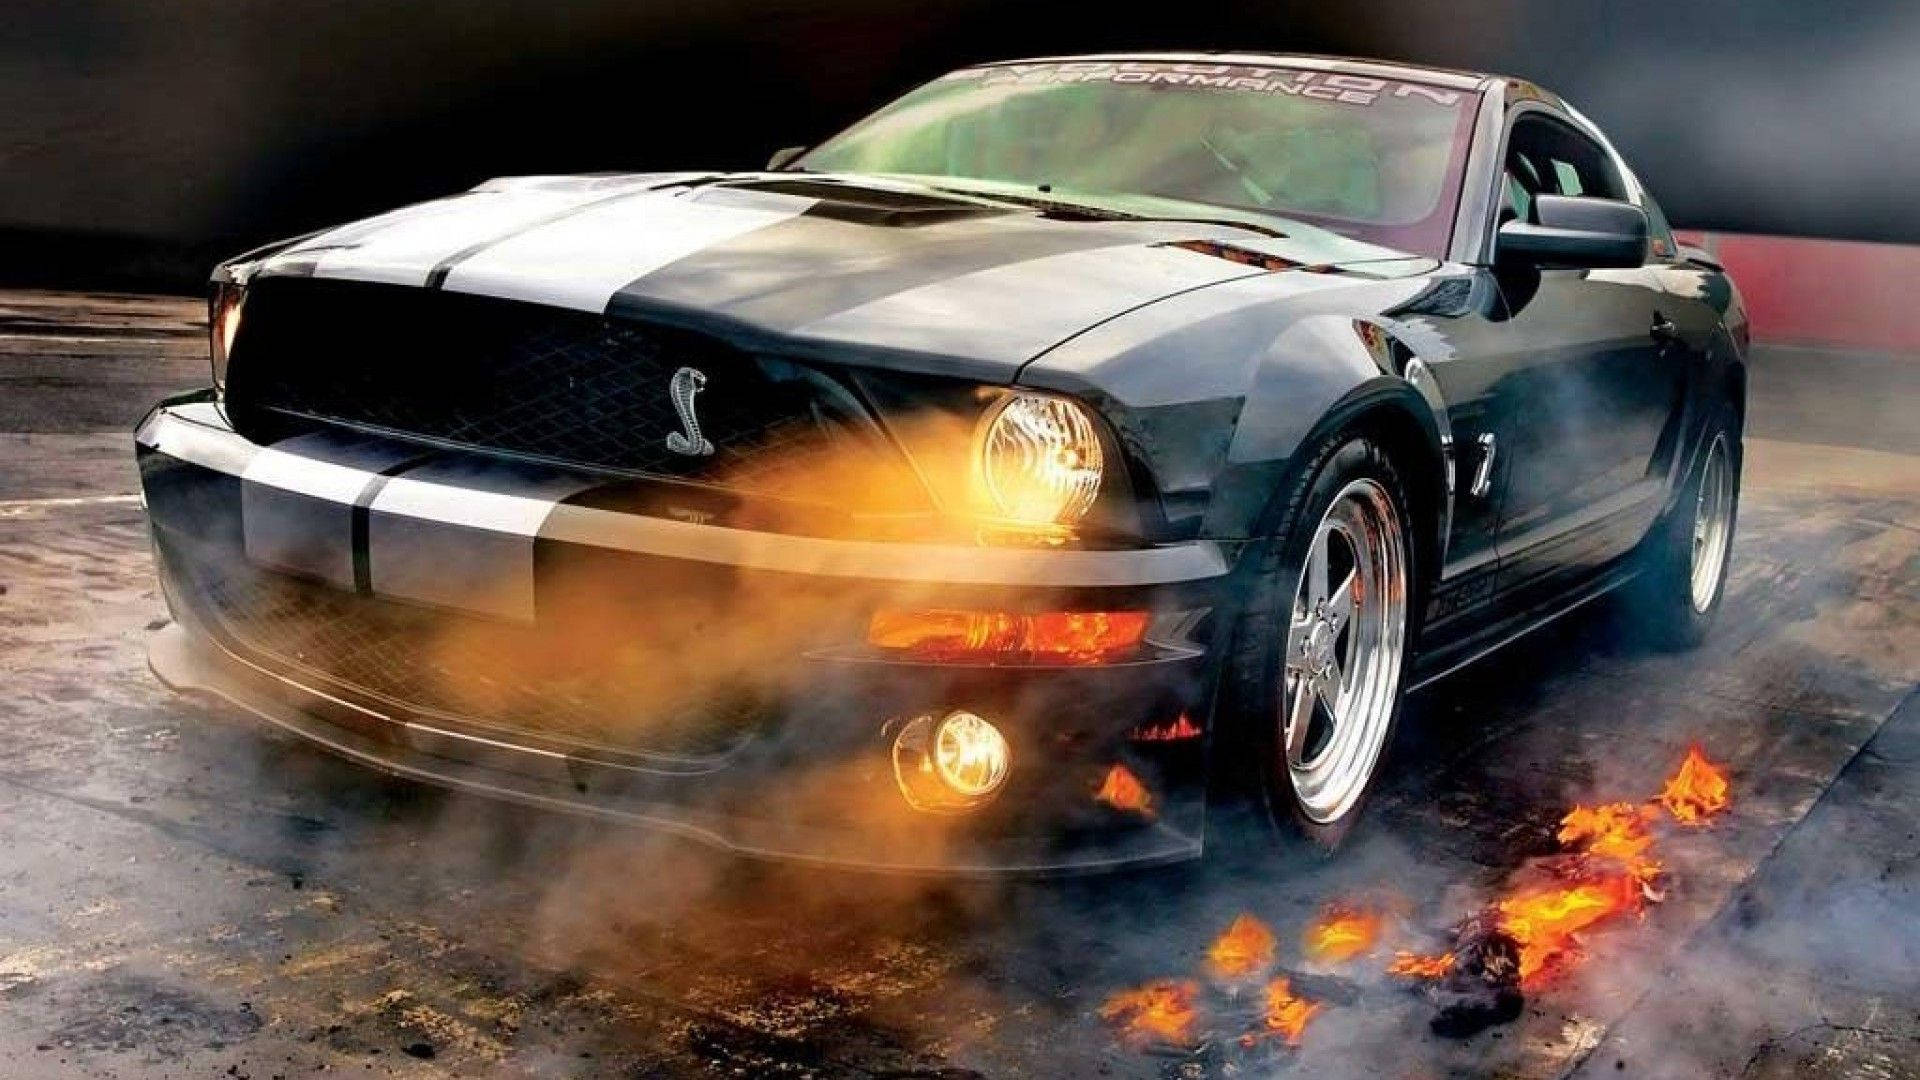 Ford Mustang Gt On Flames Background